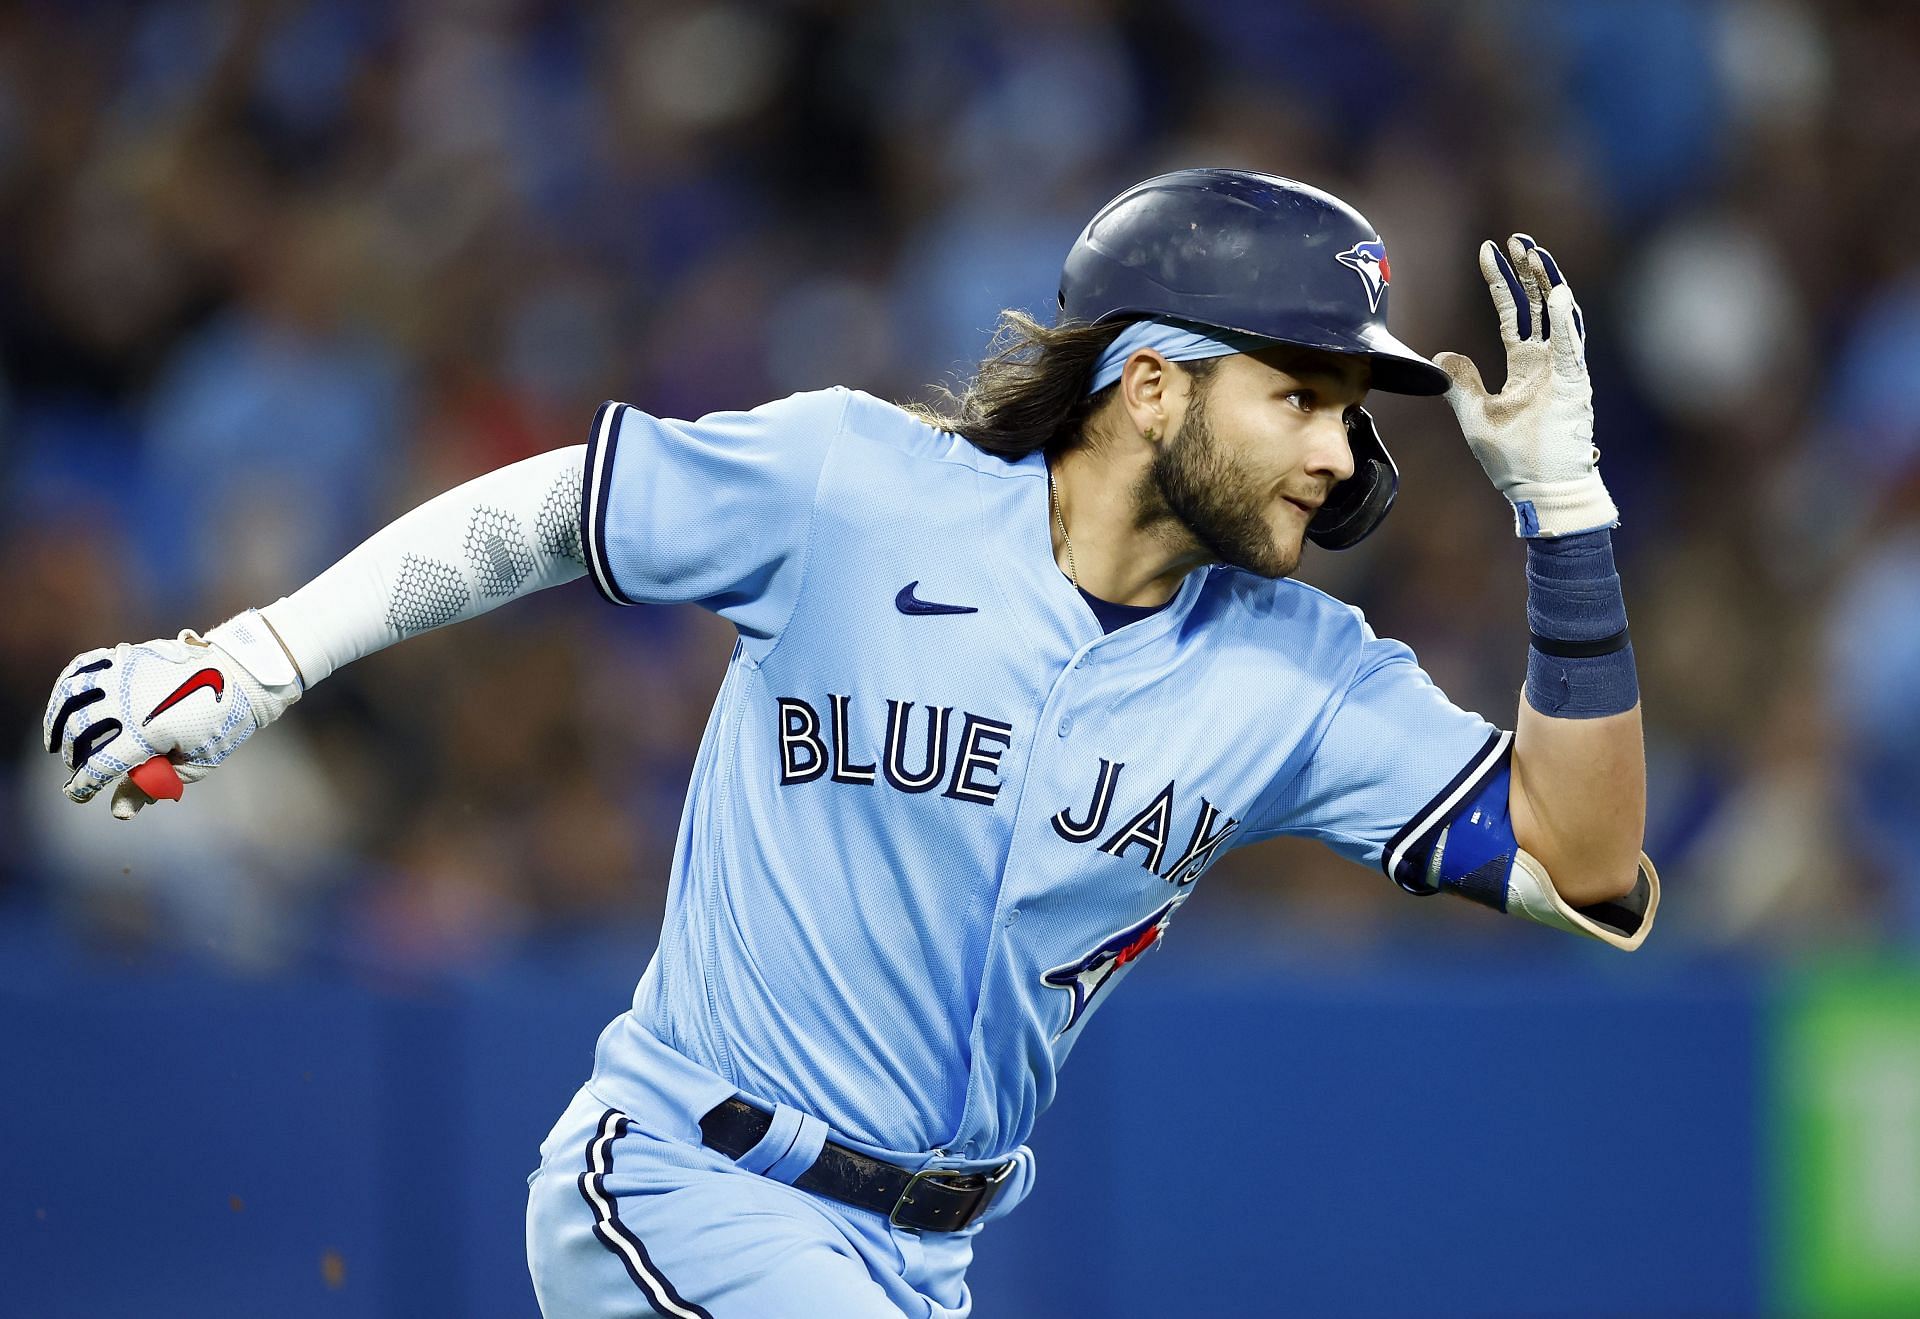 Bichette runs the bases after getting a hit in a Toronto Blue Jays v Houston Astros game.